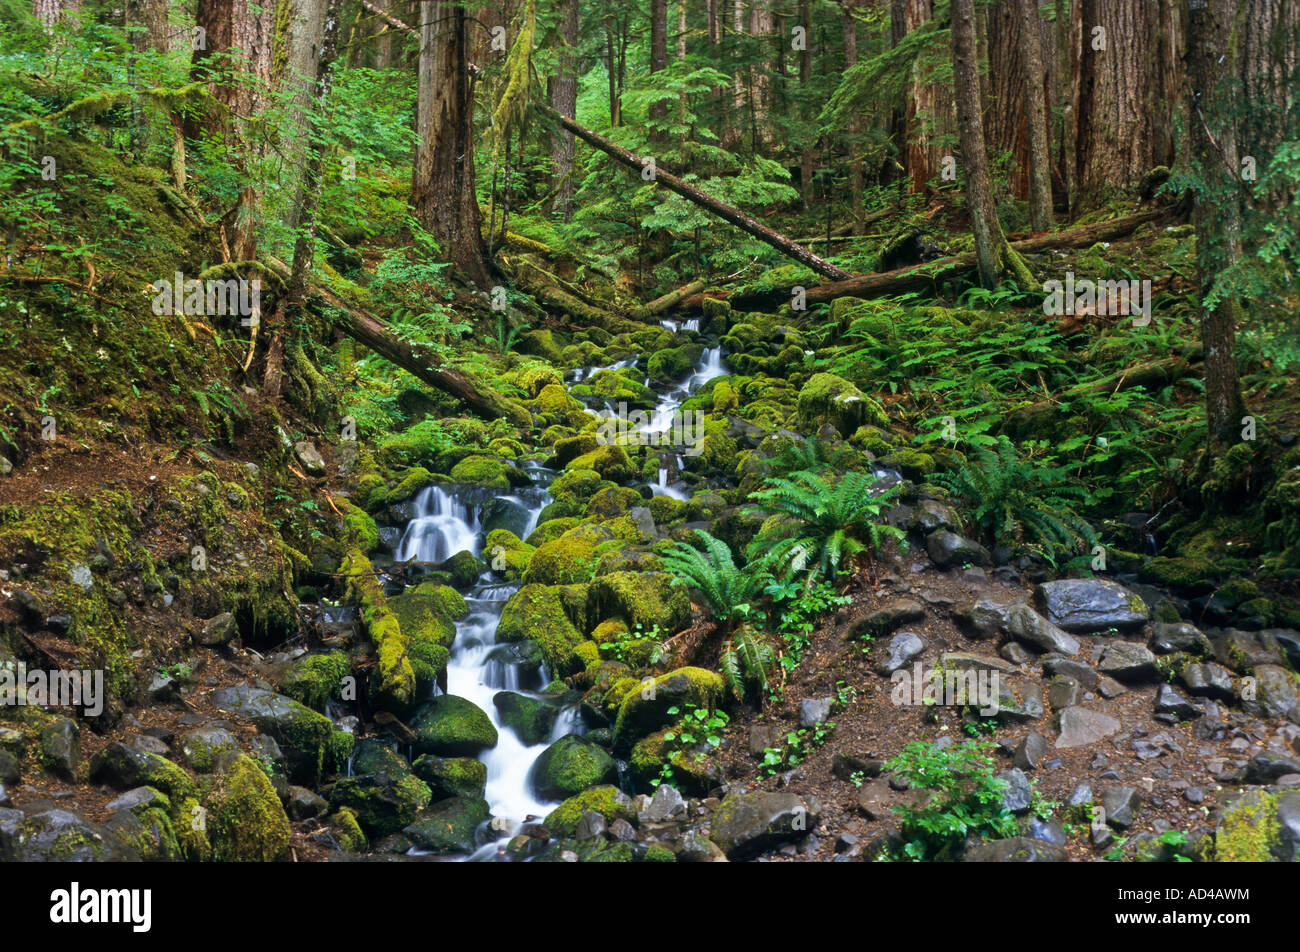 Olympic National Park, Washington, United States of America Banque D'Images